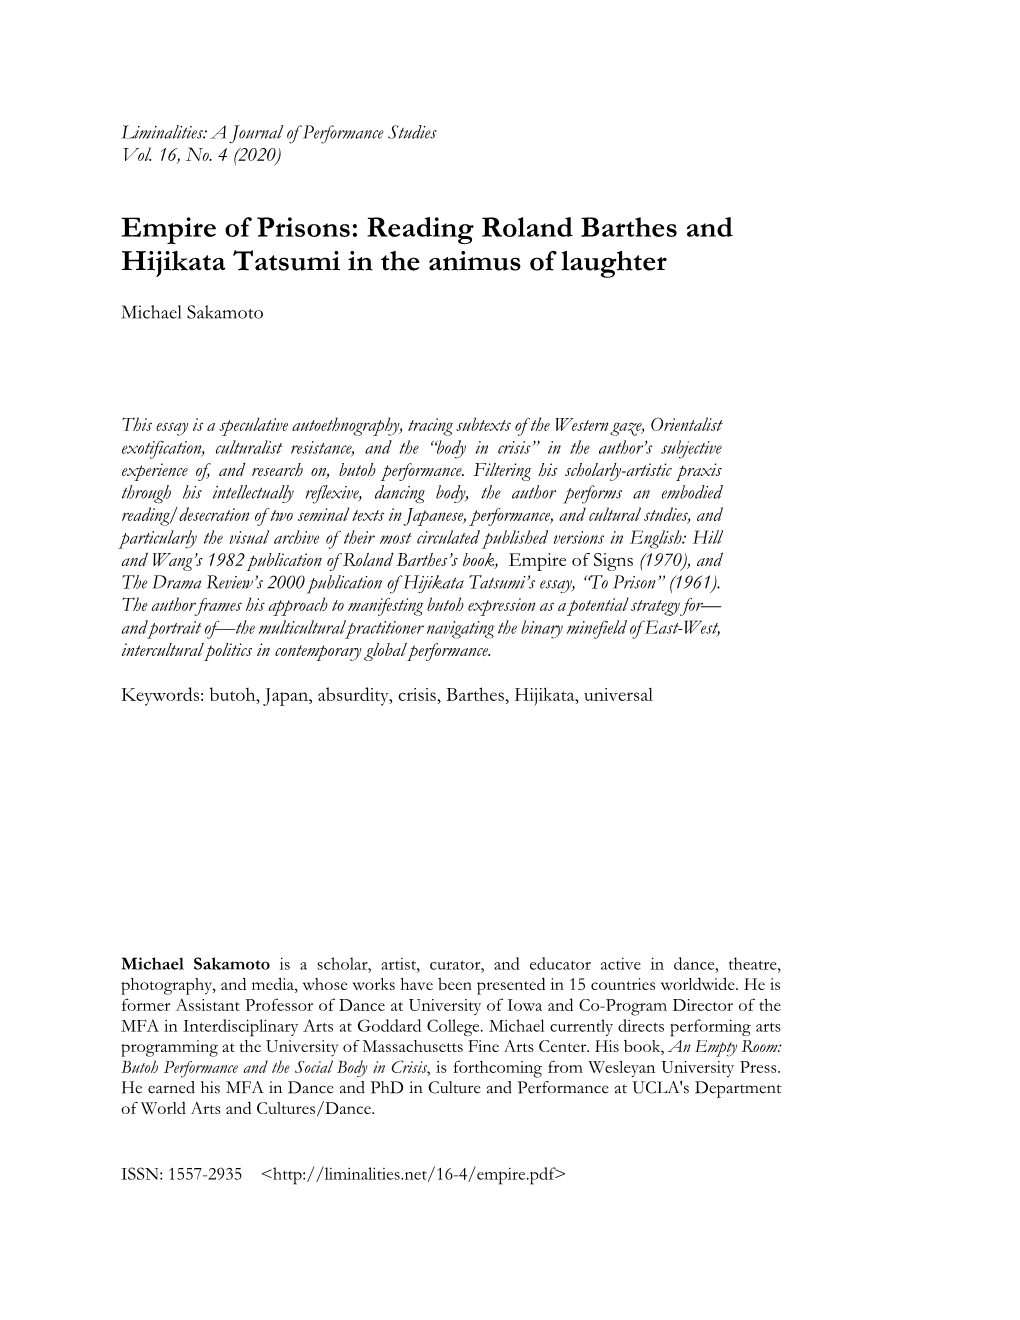 Empire of Prisons: Reading Roland Barthes and Hijikata Tatsumi in the Animus of Laughter